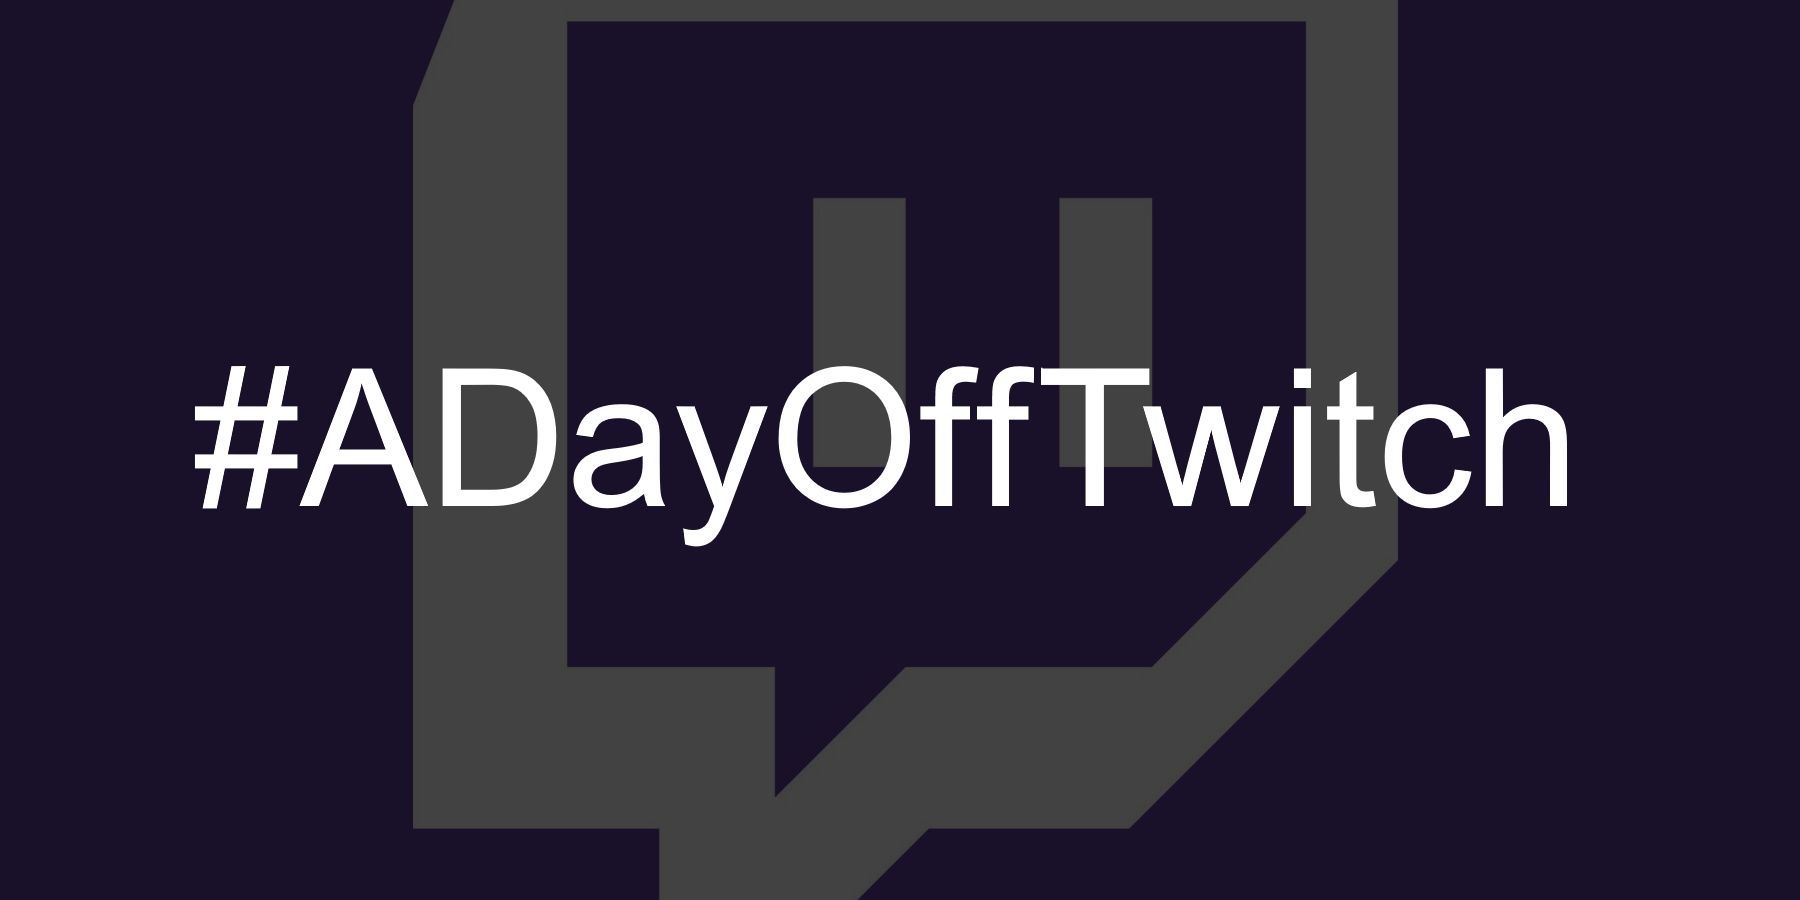 #ADayOffTwitch movement against hate raids on Twitch